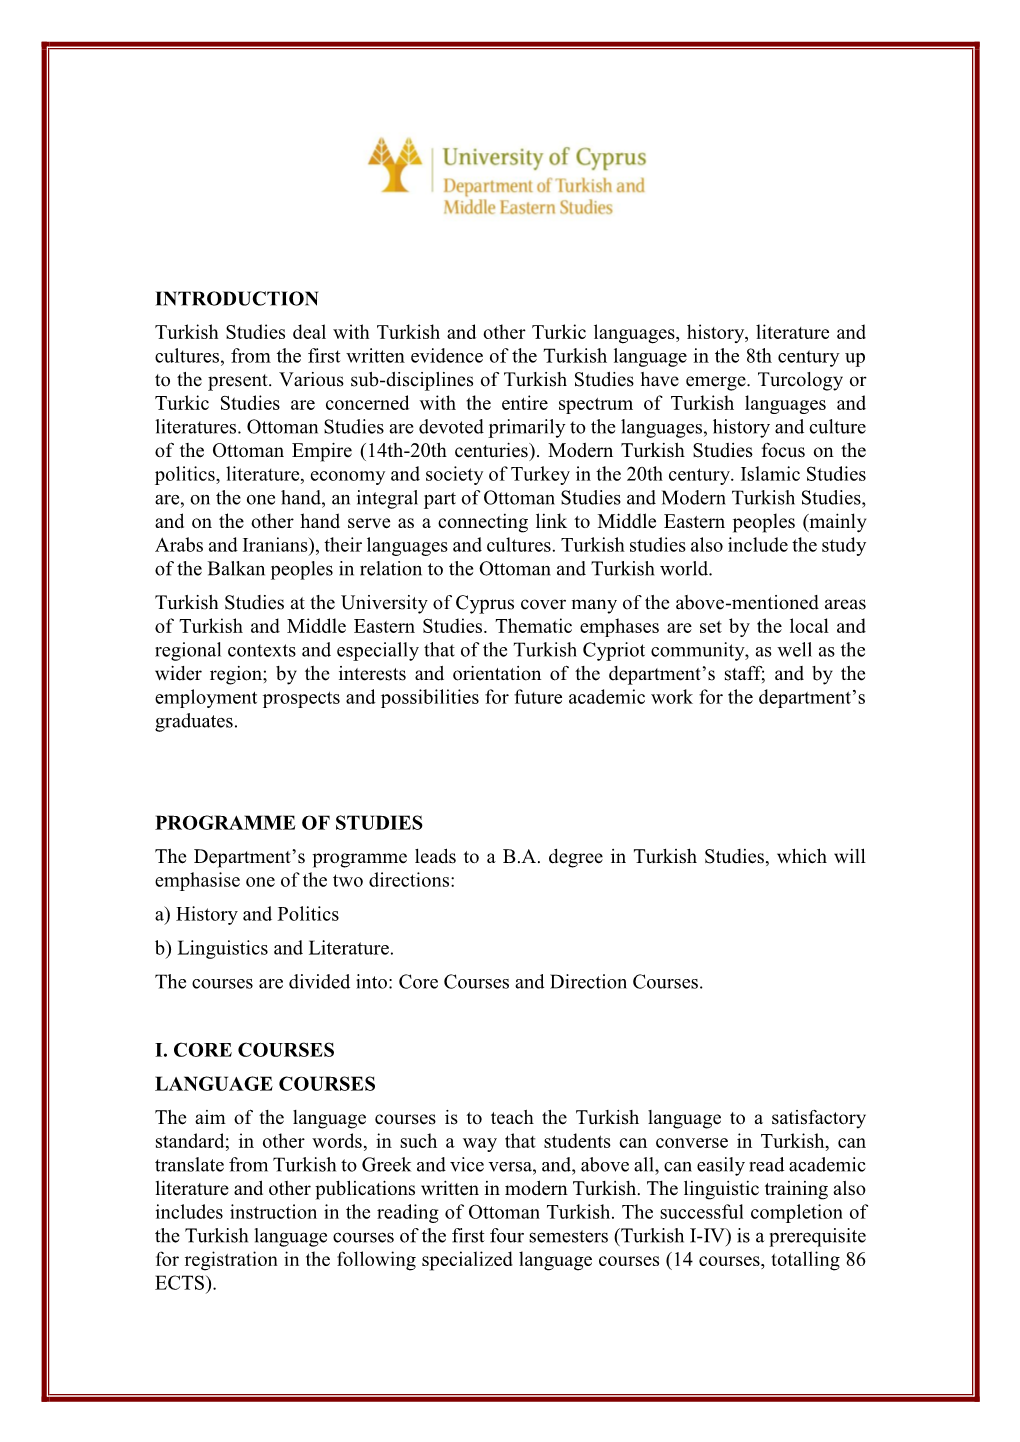 INTRODUCTION Turkish Studies Deal with Turkish and Other Turkic